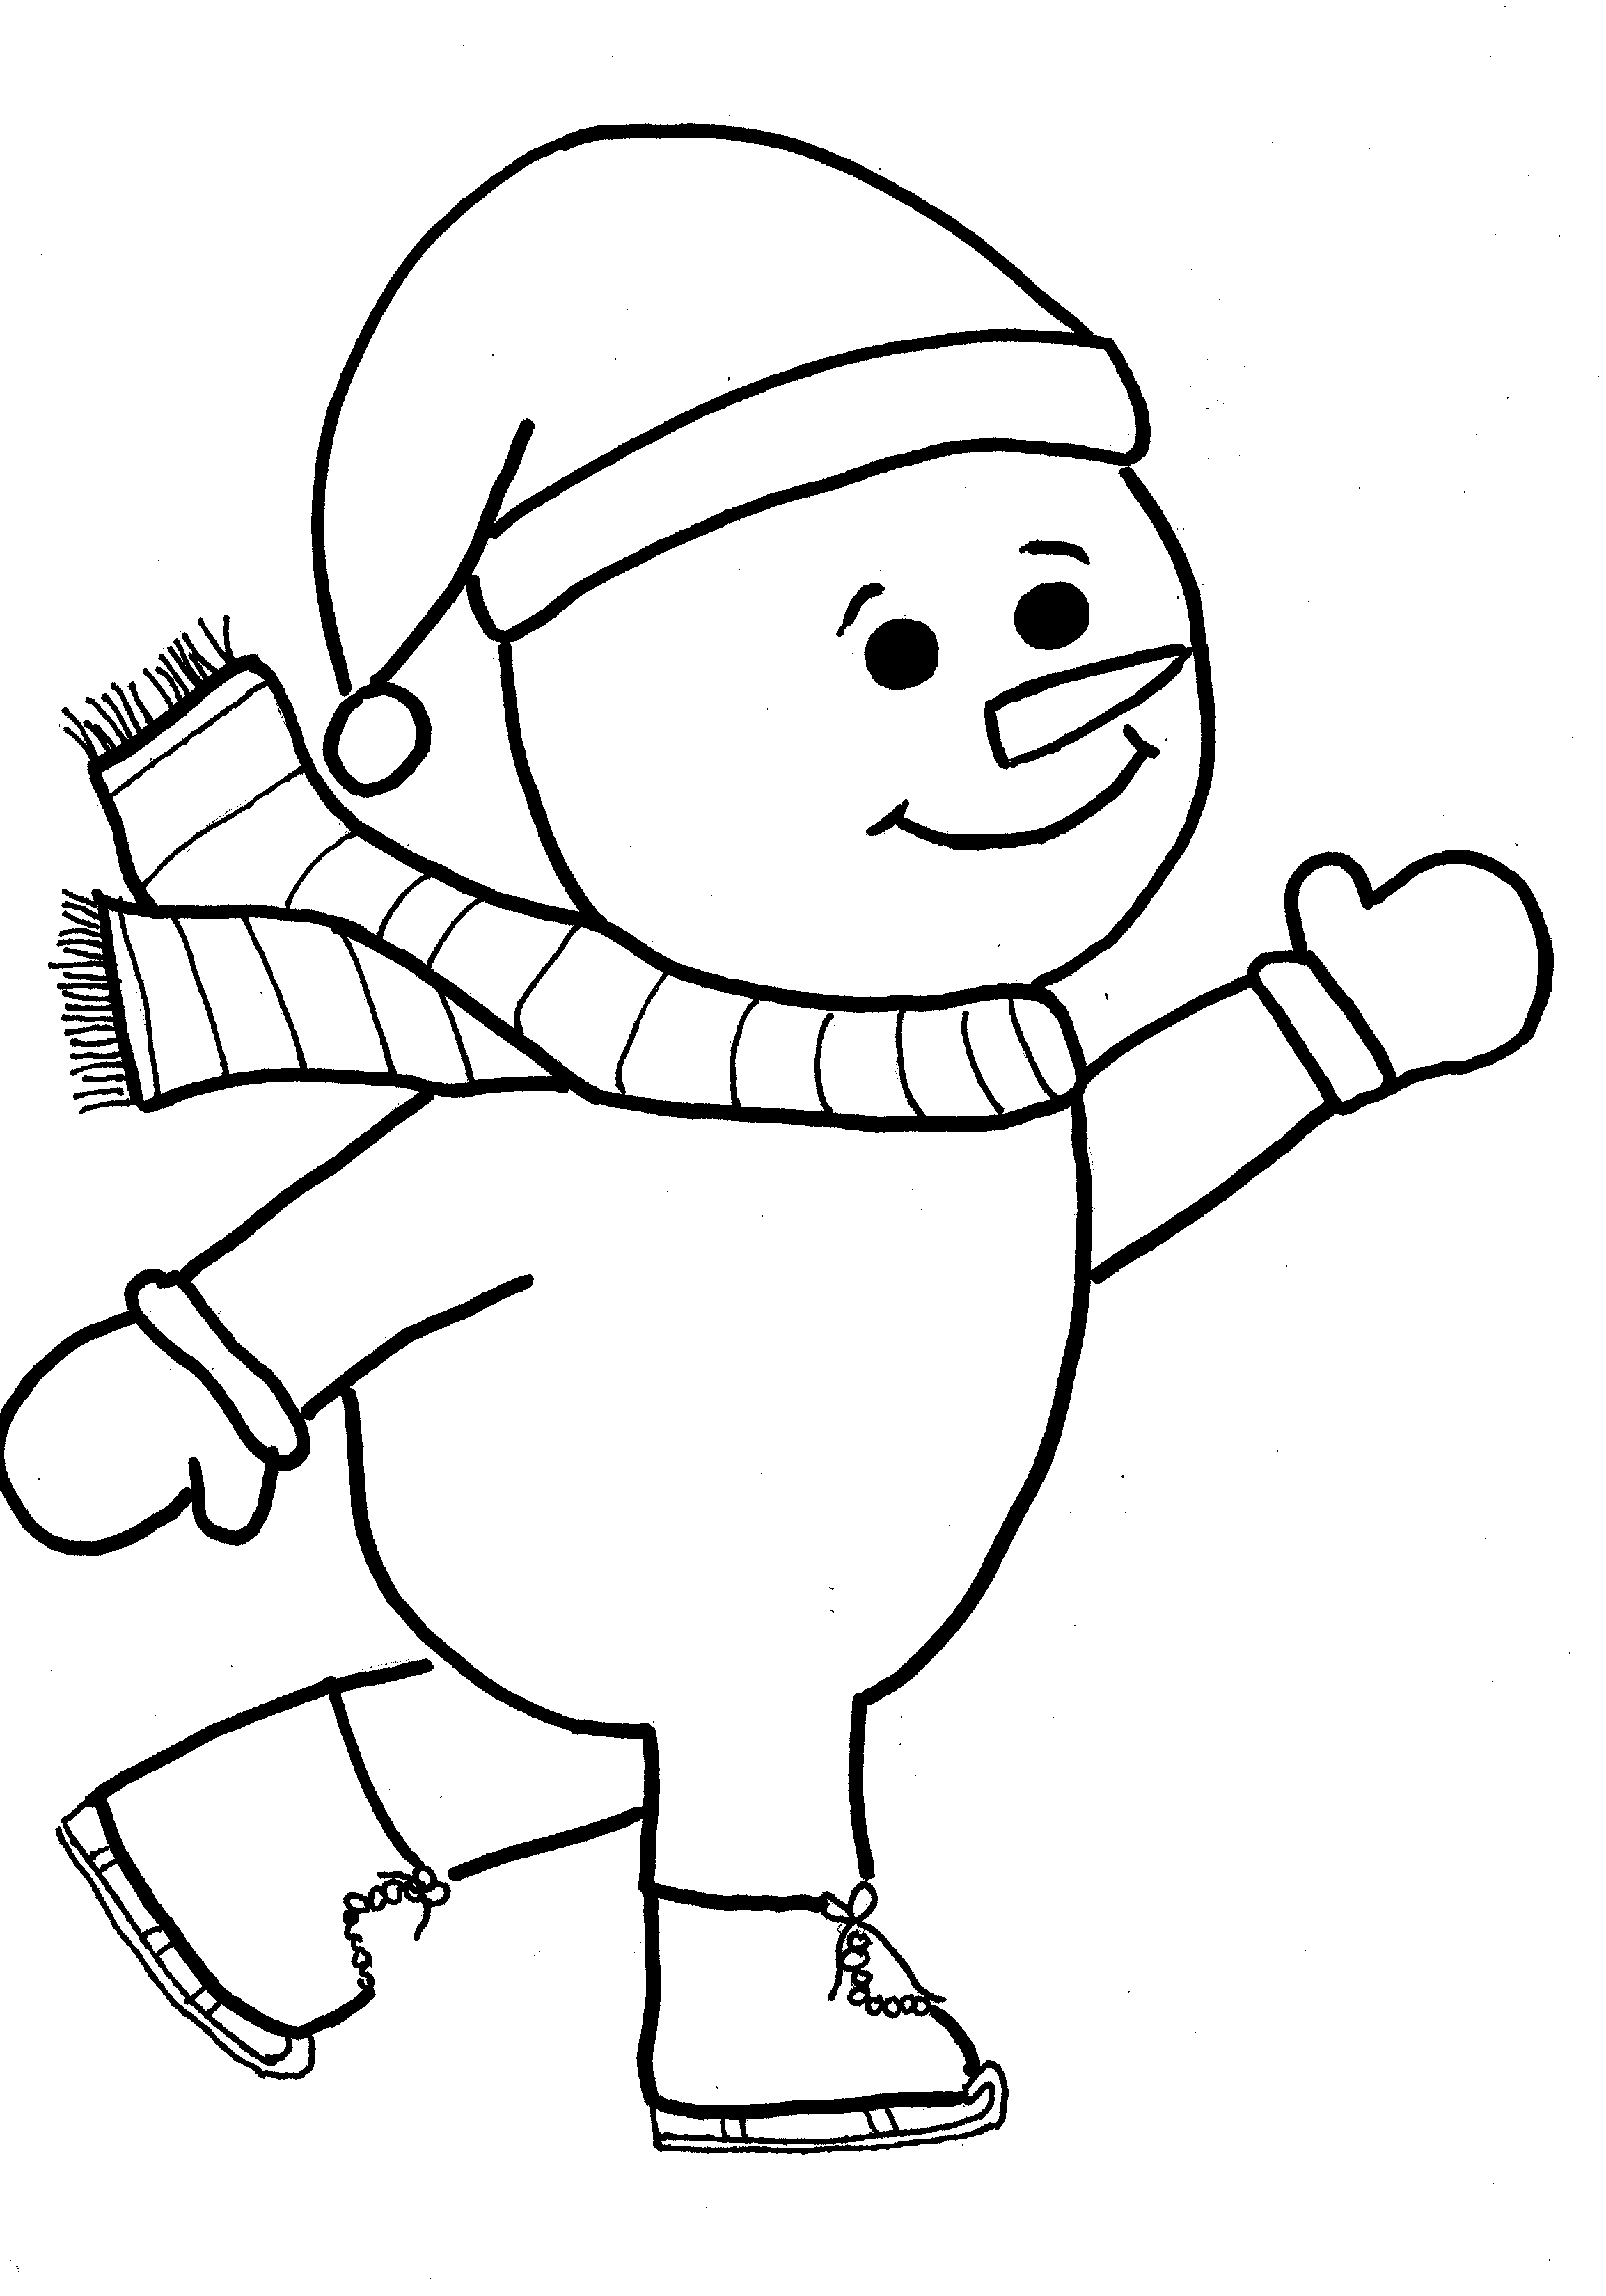 Free Printable Coloring Pages Christmas Snowman Download Free Clip Art 